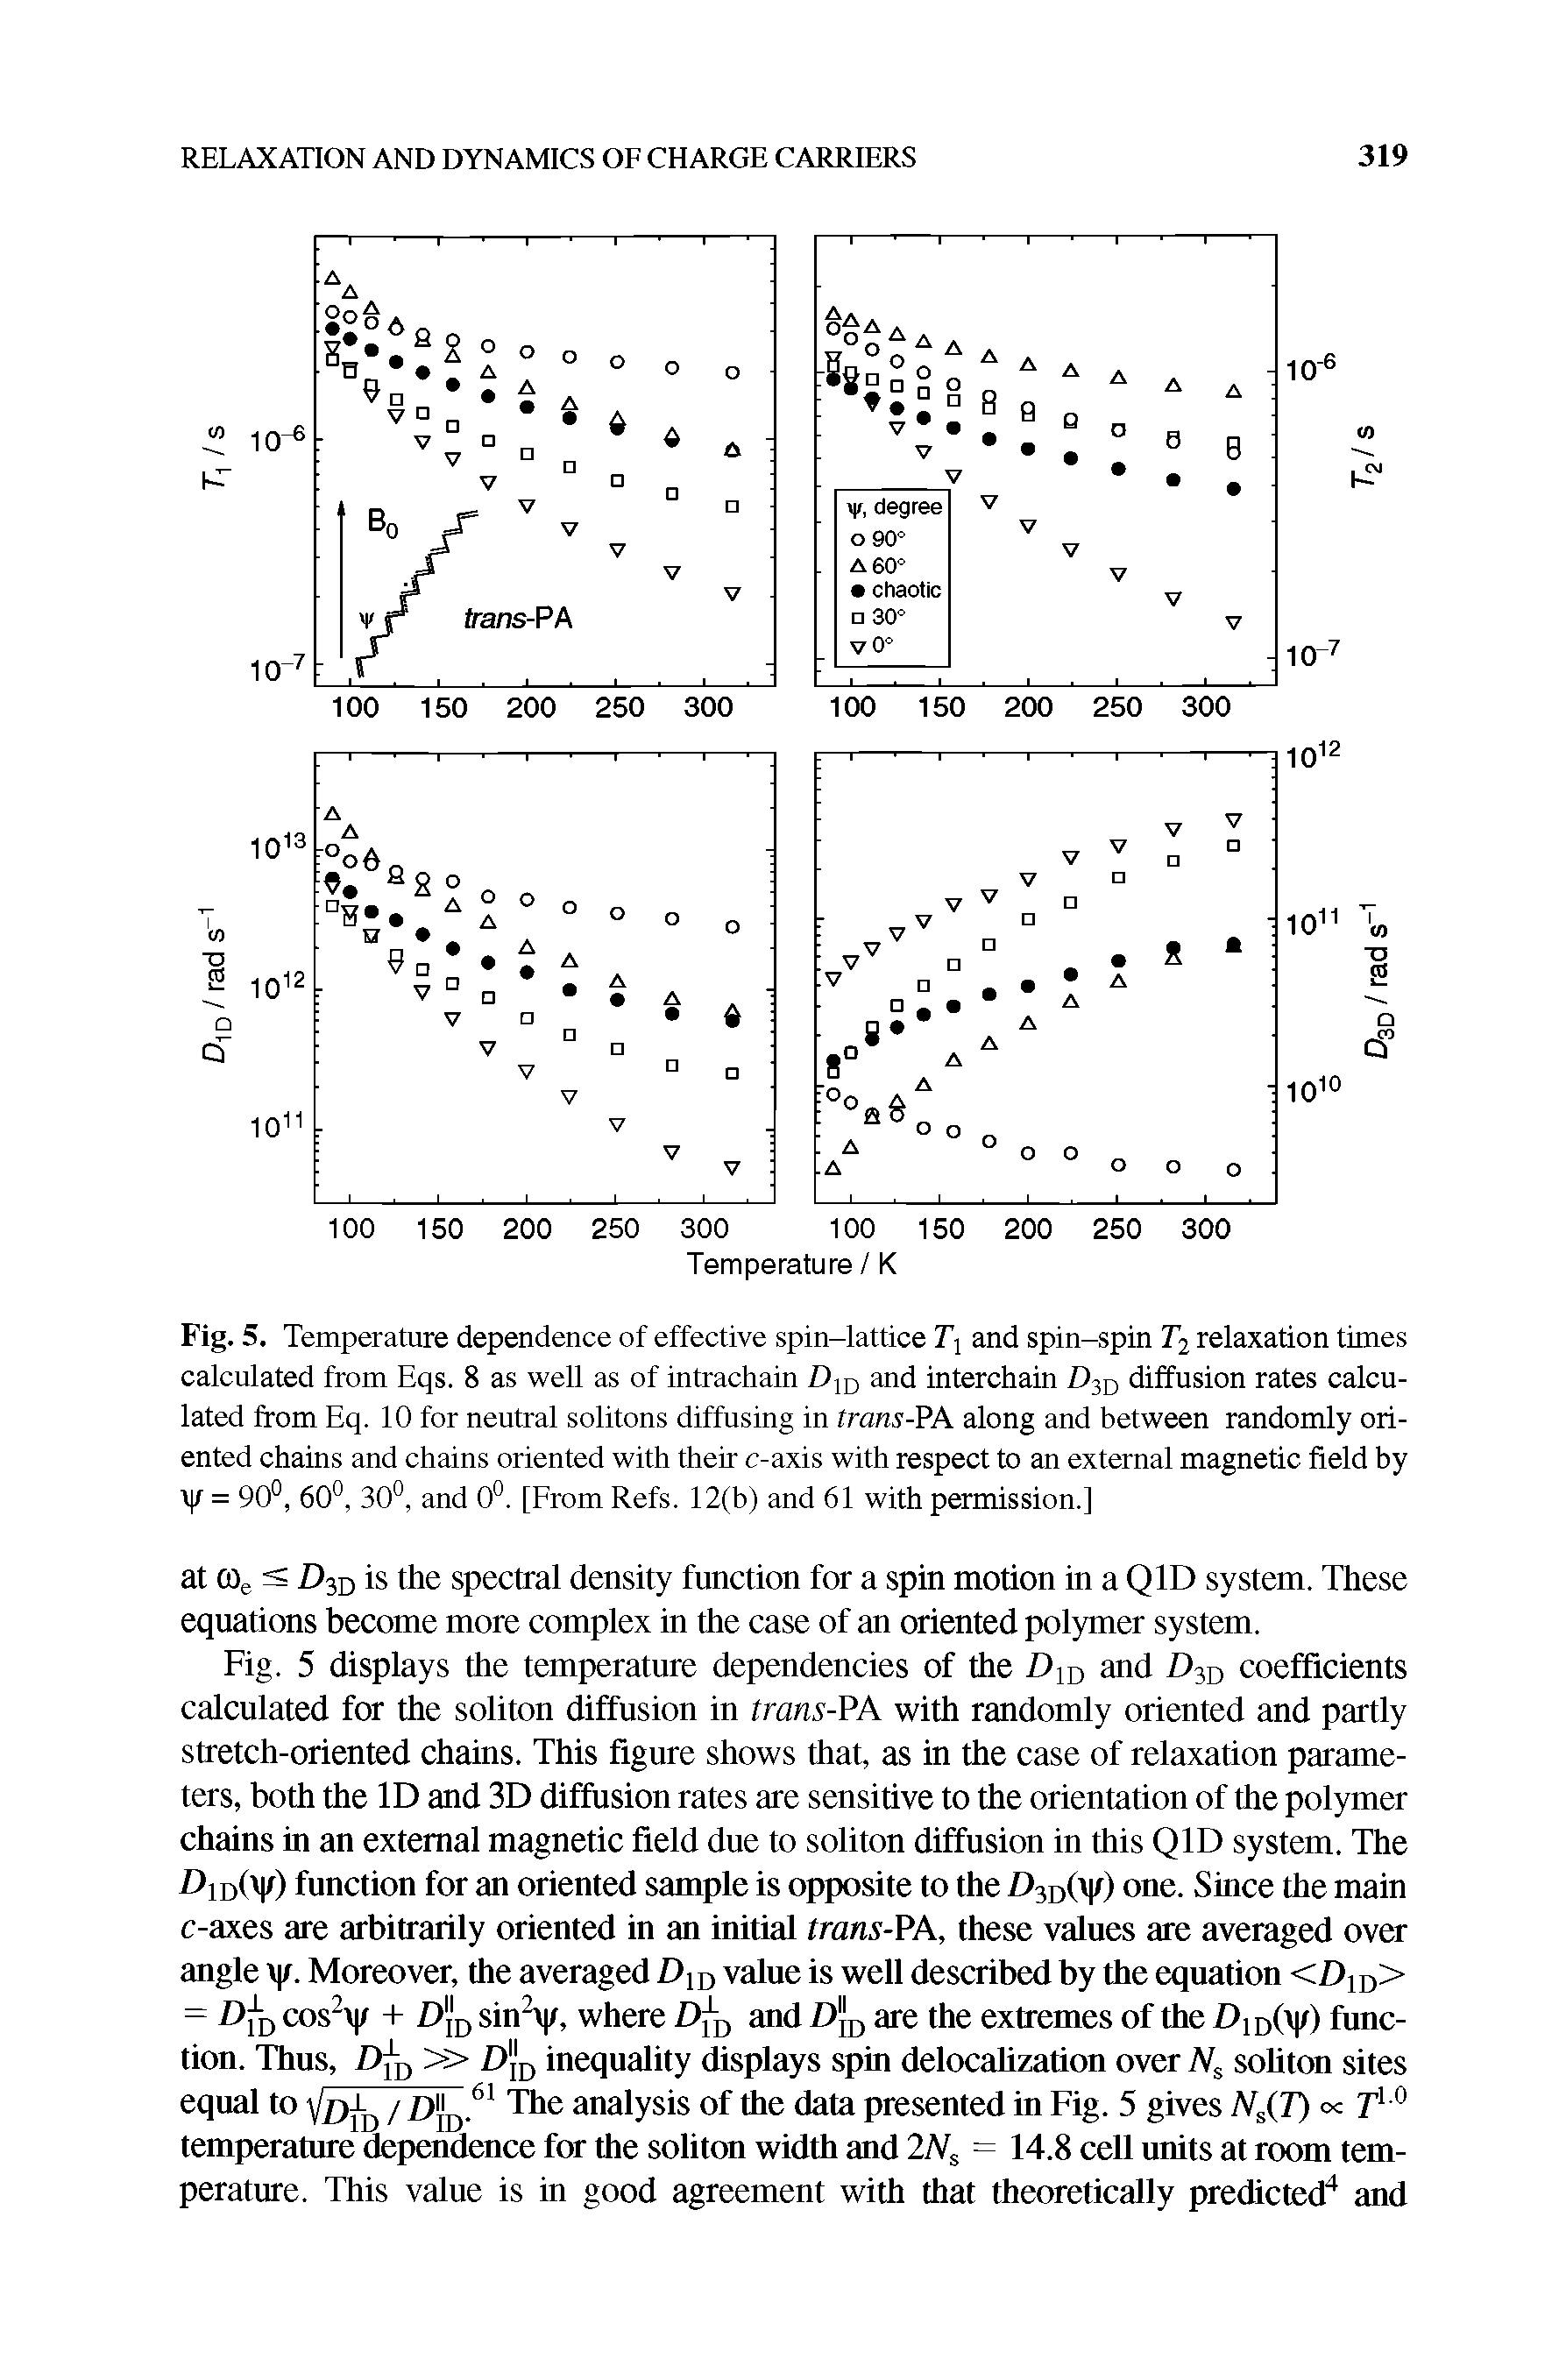 Fig. 5. Temperature dependence of effective spin-lattice Tj and spin-spin Ti relaxation times calculated from Eqs. 8 as well as of intrachain and interchain diffusion rates calculated from Eq. 10 for neutral solitons diffusing in trans-PA along and between randomly oriented chains and chains oriented with their c-axis with respect to an external magnetic field by / = 90°, 60°, 30°, and 0°. [From Refs. 12(b) and 61 with permission.]...